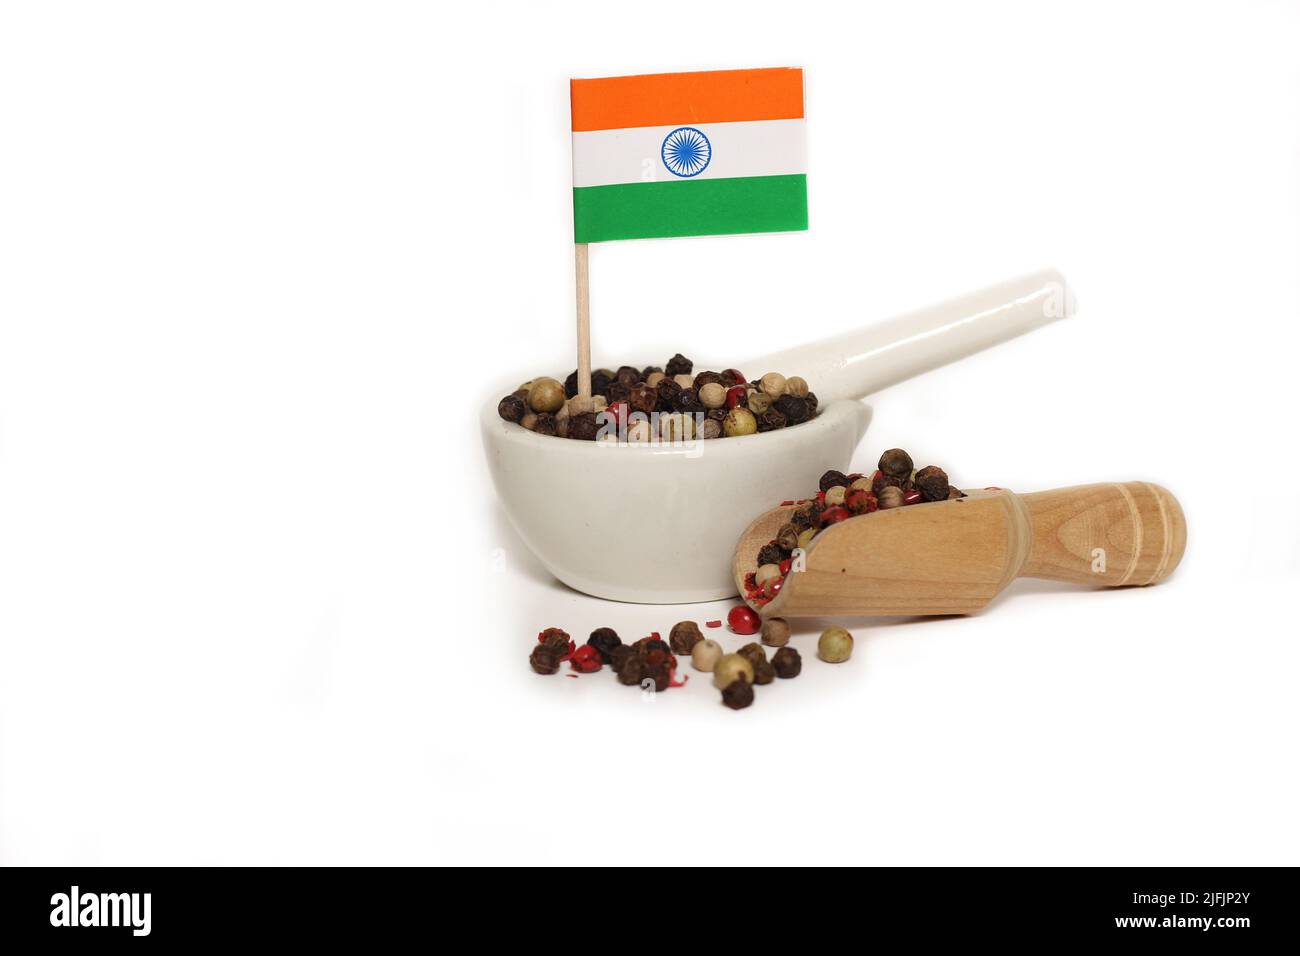 Mortar and Pestle With Mixed Peppercorns and Flag of India on White Background Stock Photo